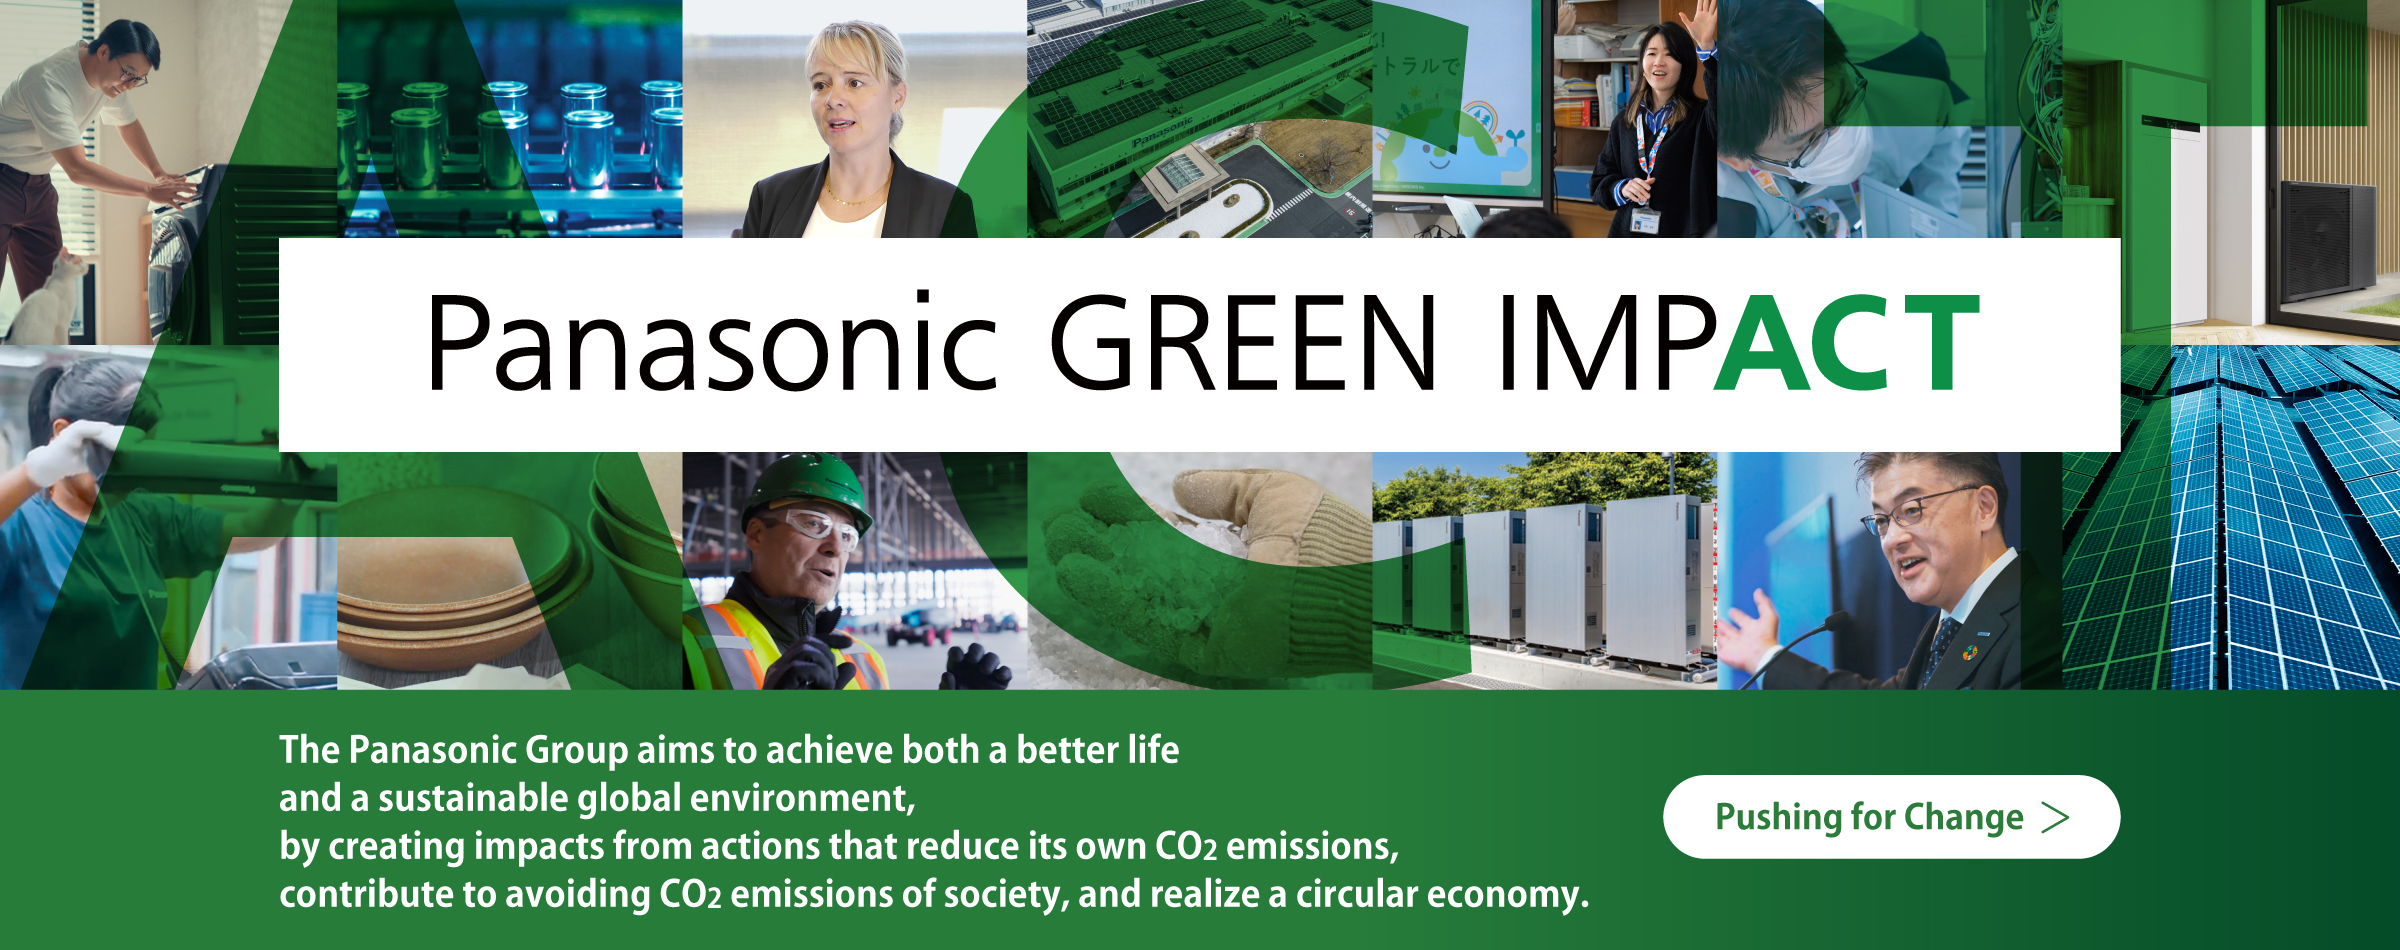 Panasonic GREEN IMPACT The Panasonic Group aims to achieve both a better life and a sustainable global environment, by creating impacts from actions that reduce our own CO2 emissions, contribute to avoiding CO2 emissions of society, and realize a circular economy. Pushing for Change